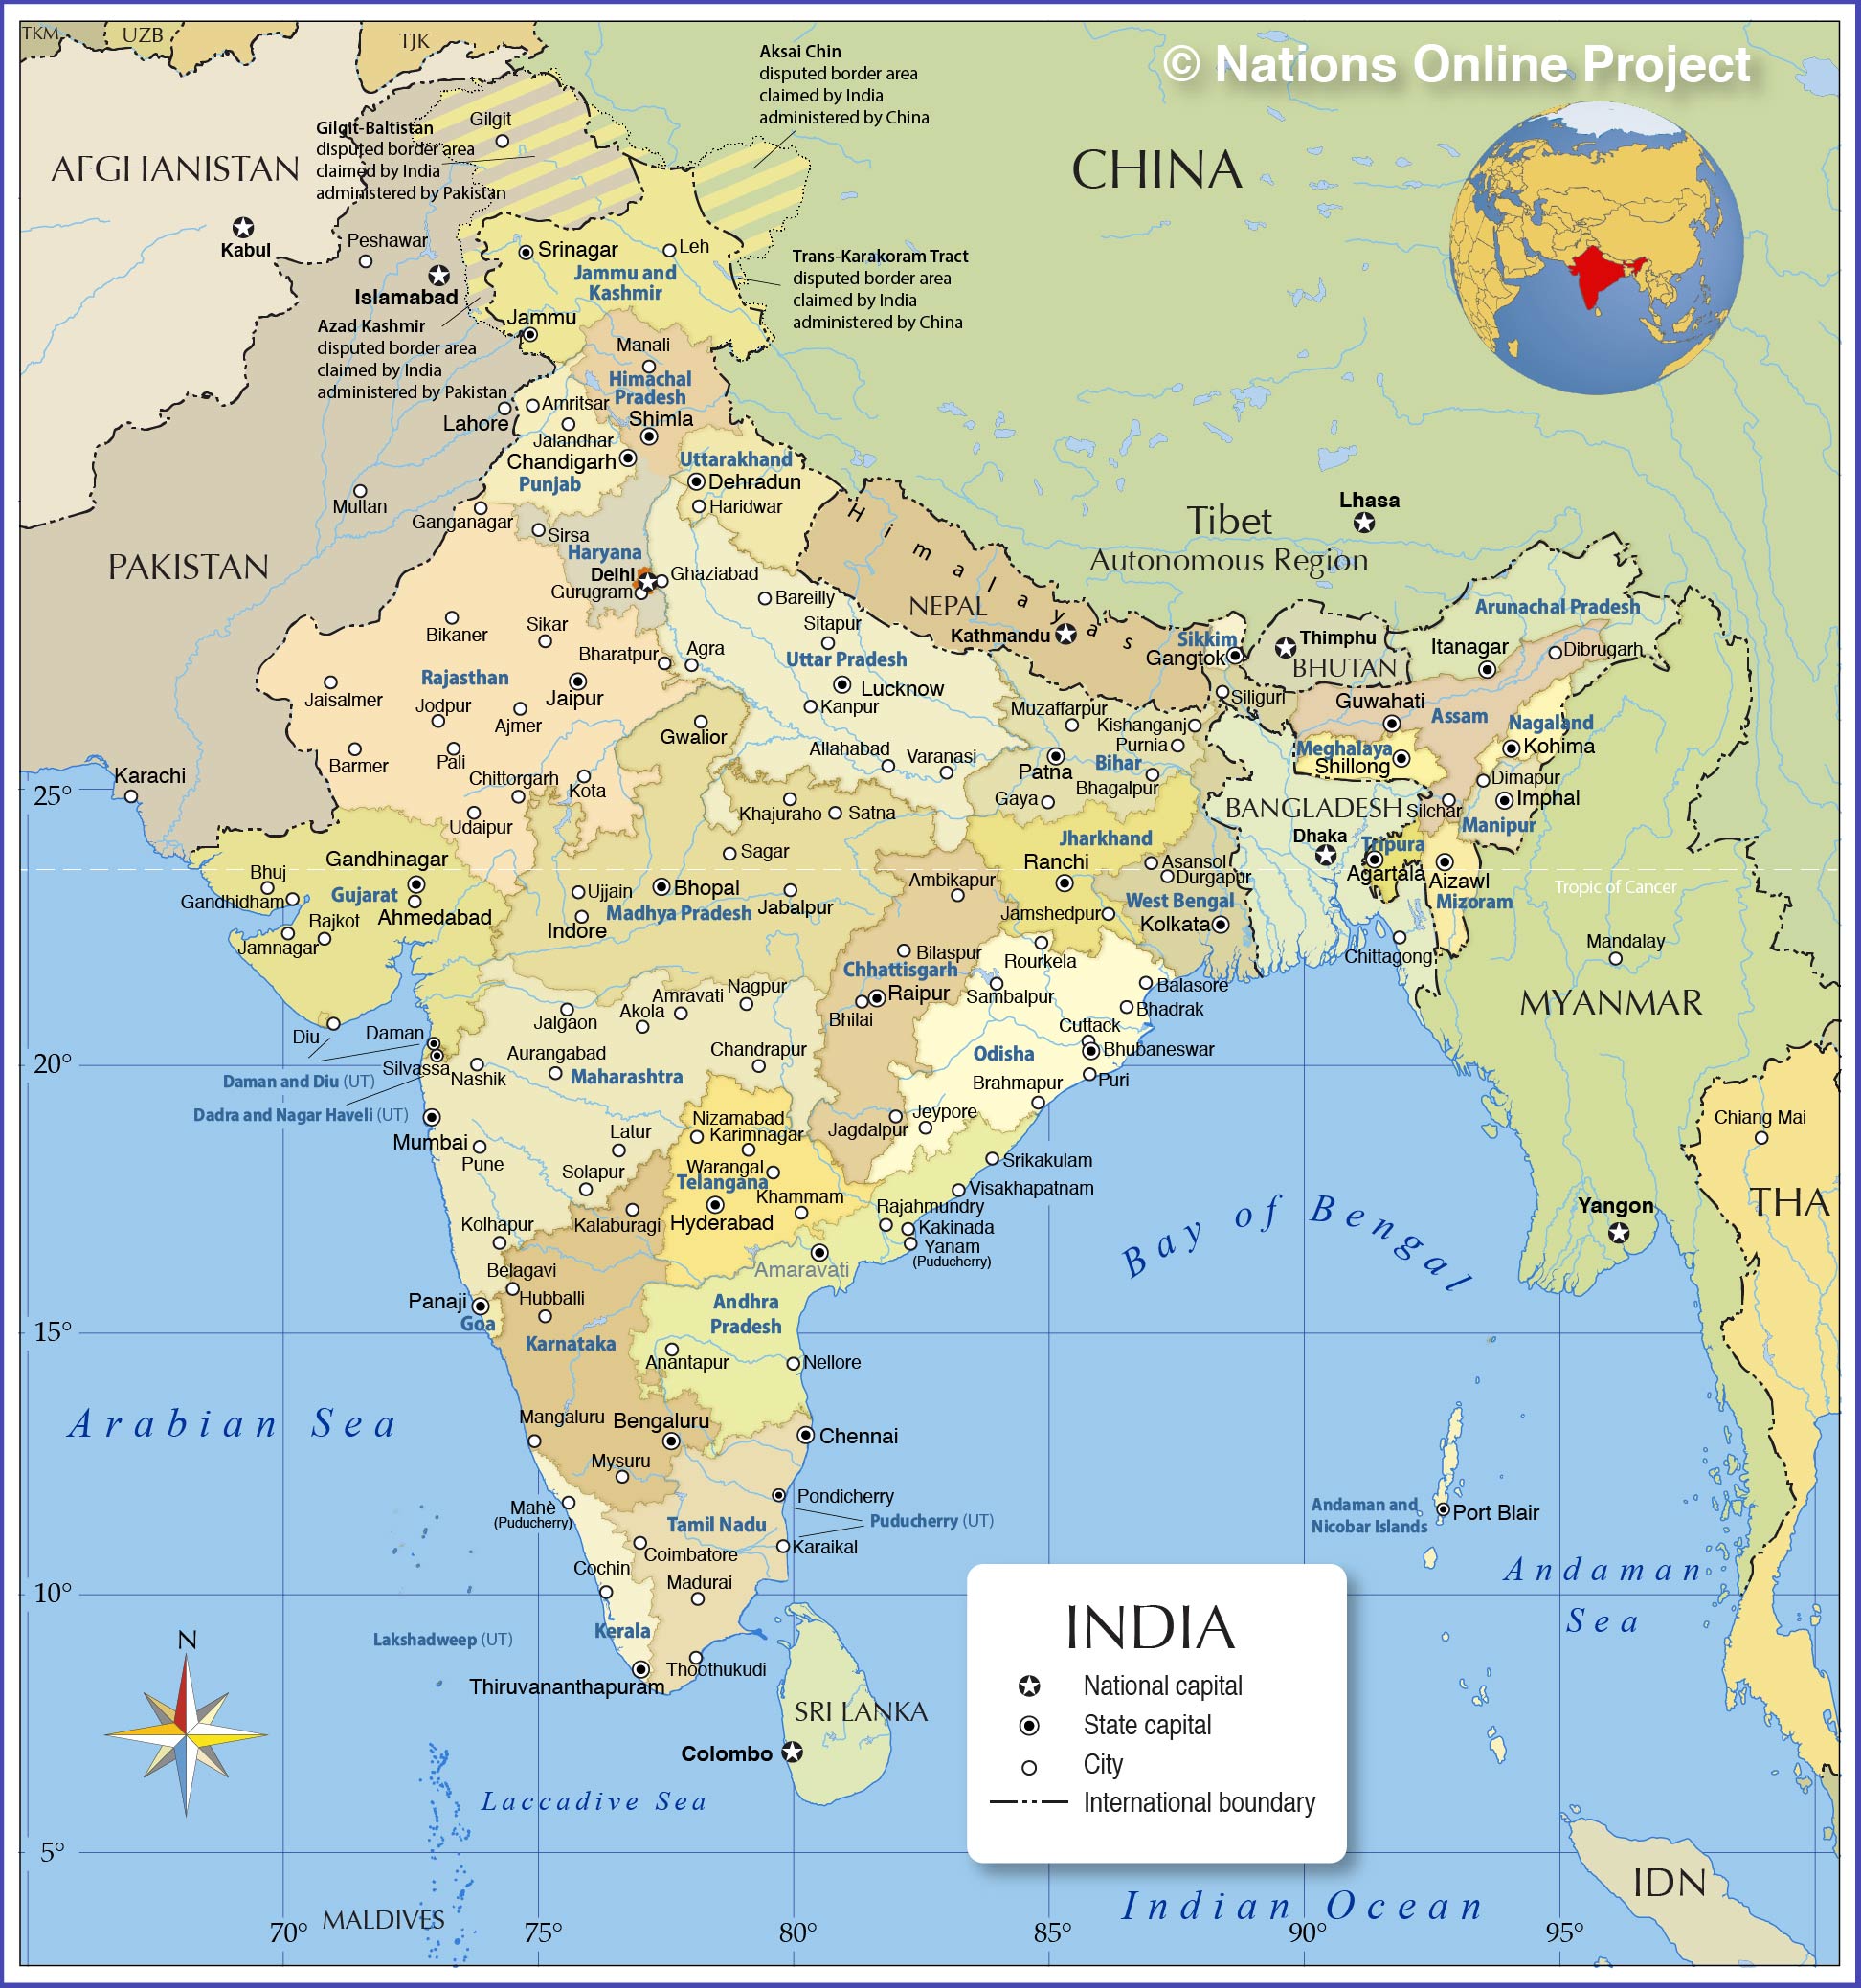 detailed map of india with states and cities Political Map Of India S States Nations Online Project detailed map of india with states and cities